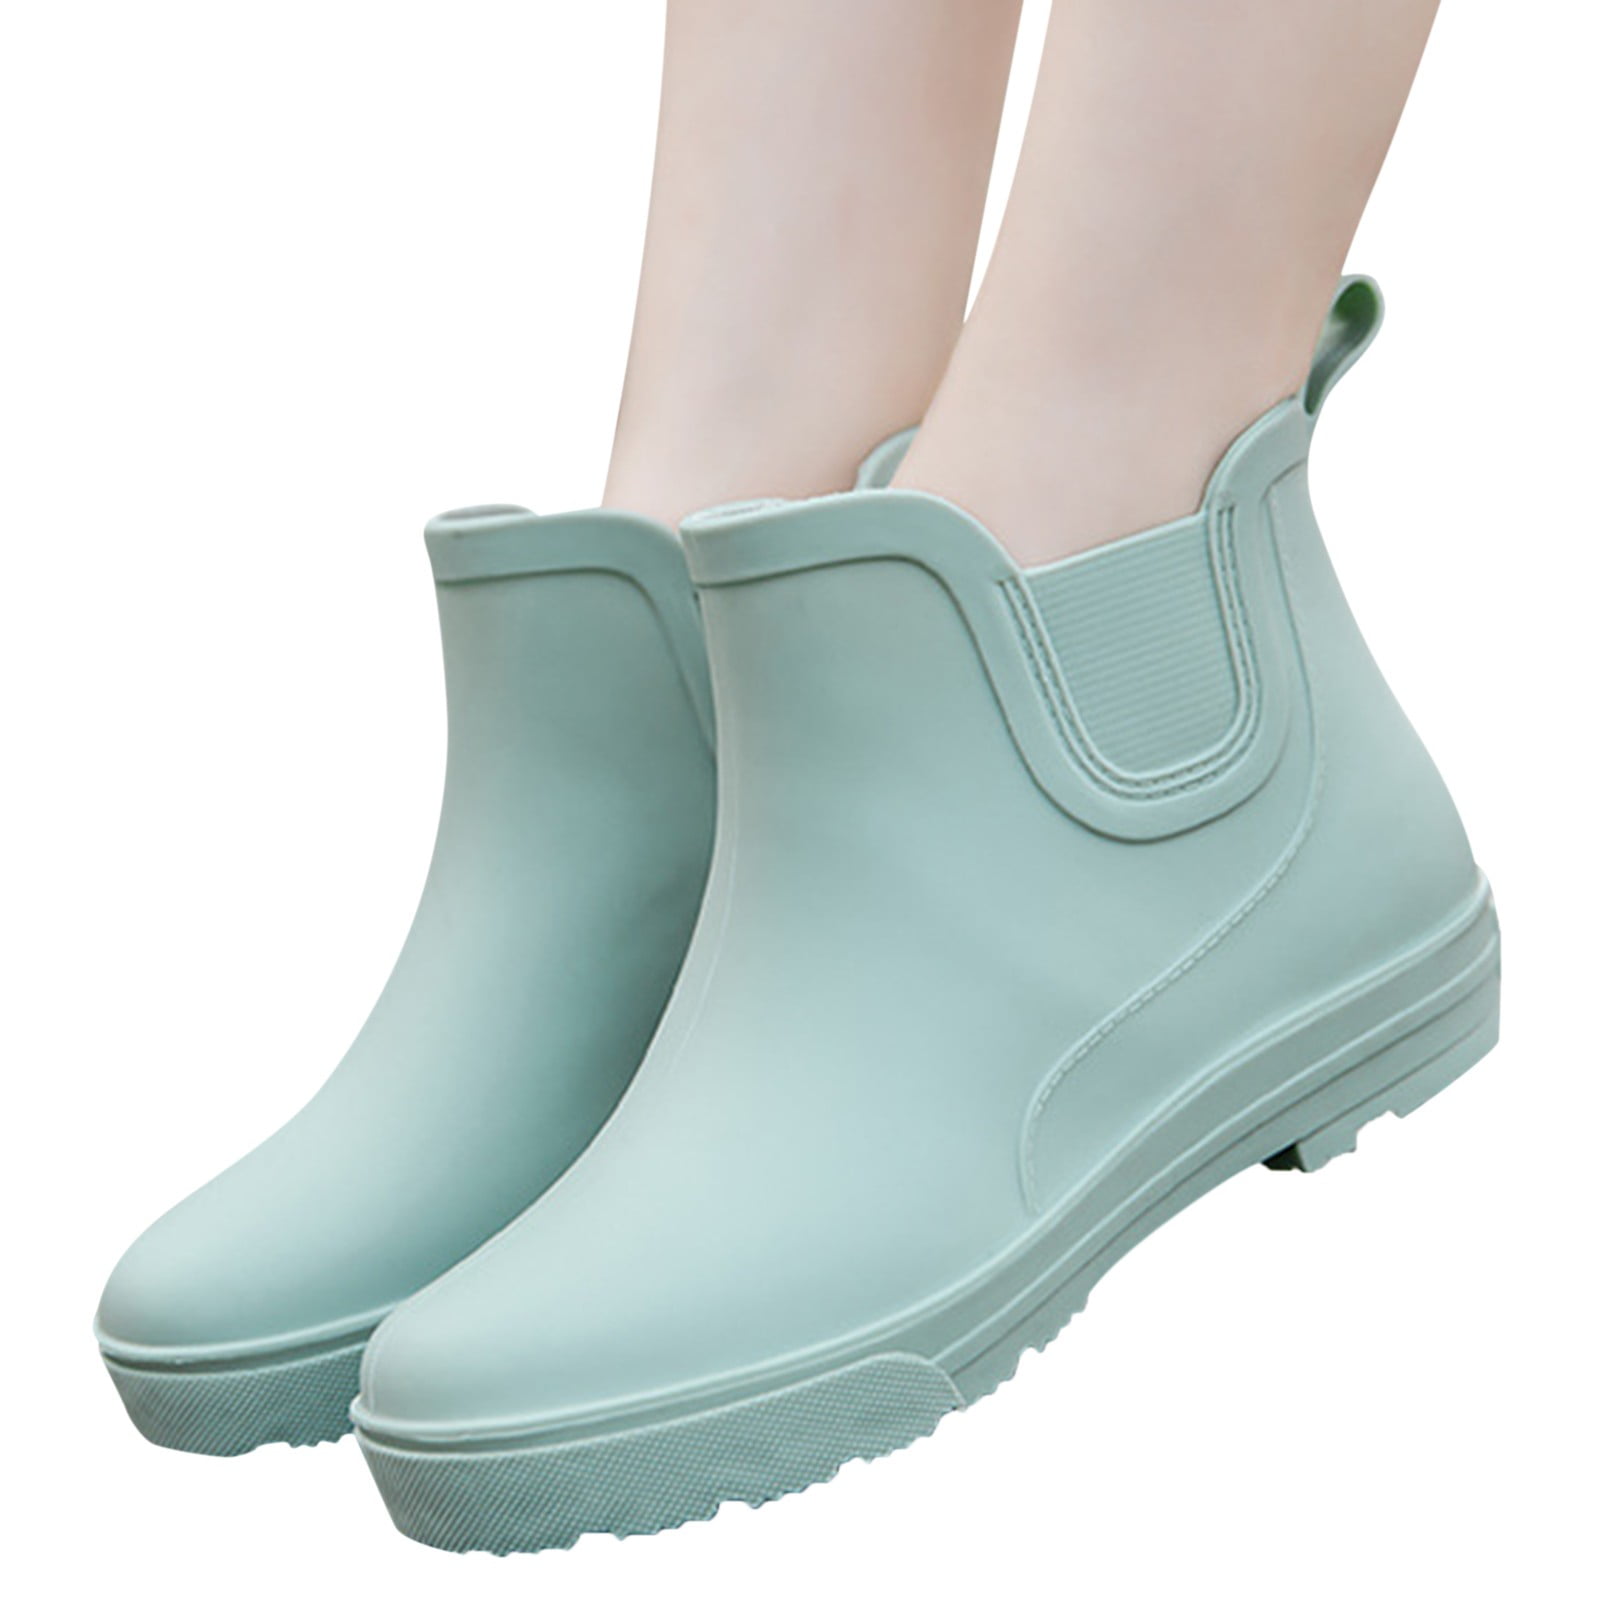 HSMQHJWE Knee High Rubber Boots Type 3 Boots Rain Boots Women Non Slip  Detachable With Cotton Inside Rain Boots Outdoor Rubber Water Shoes  Festival Tights 